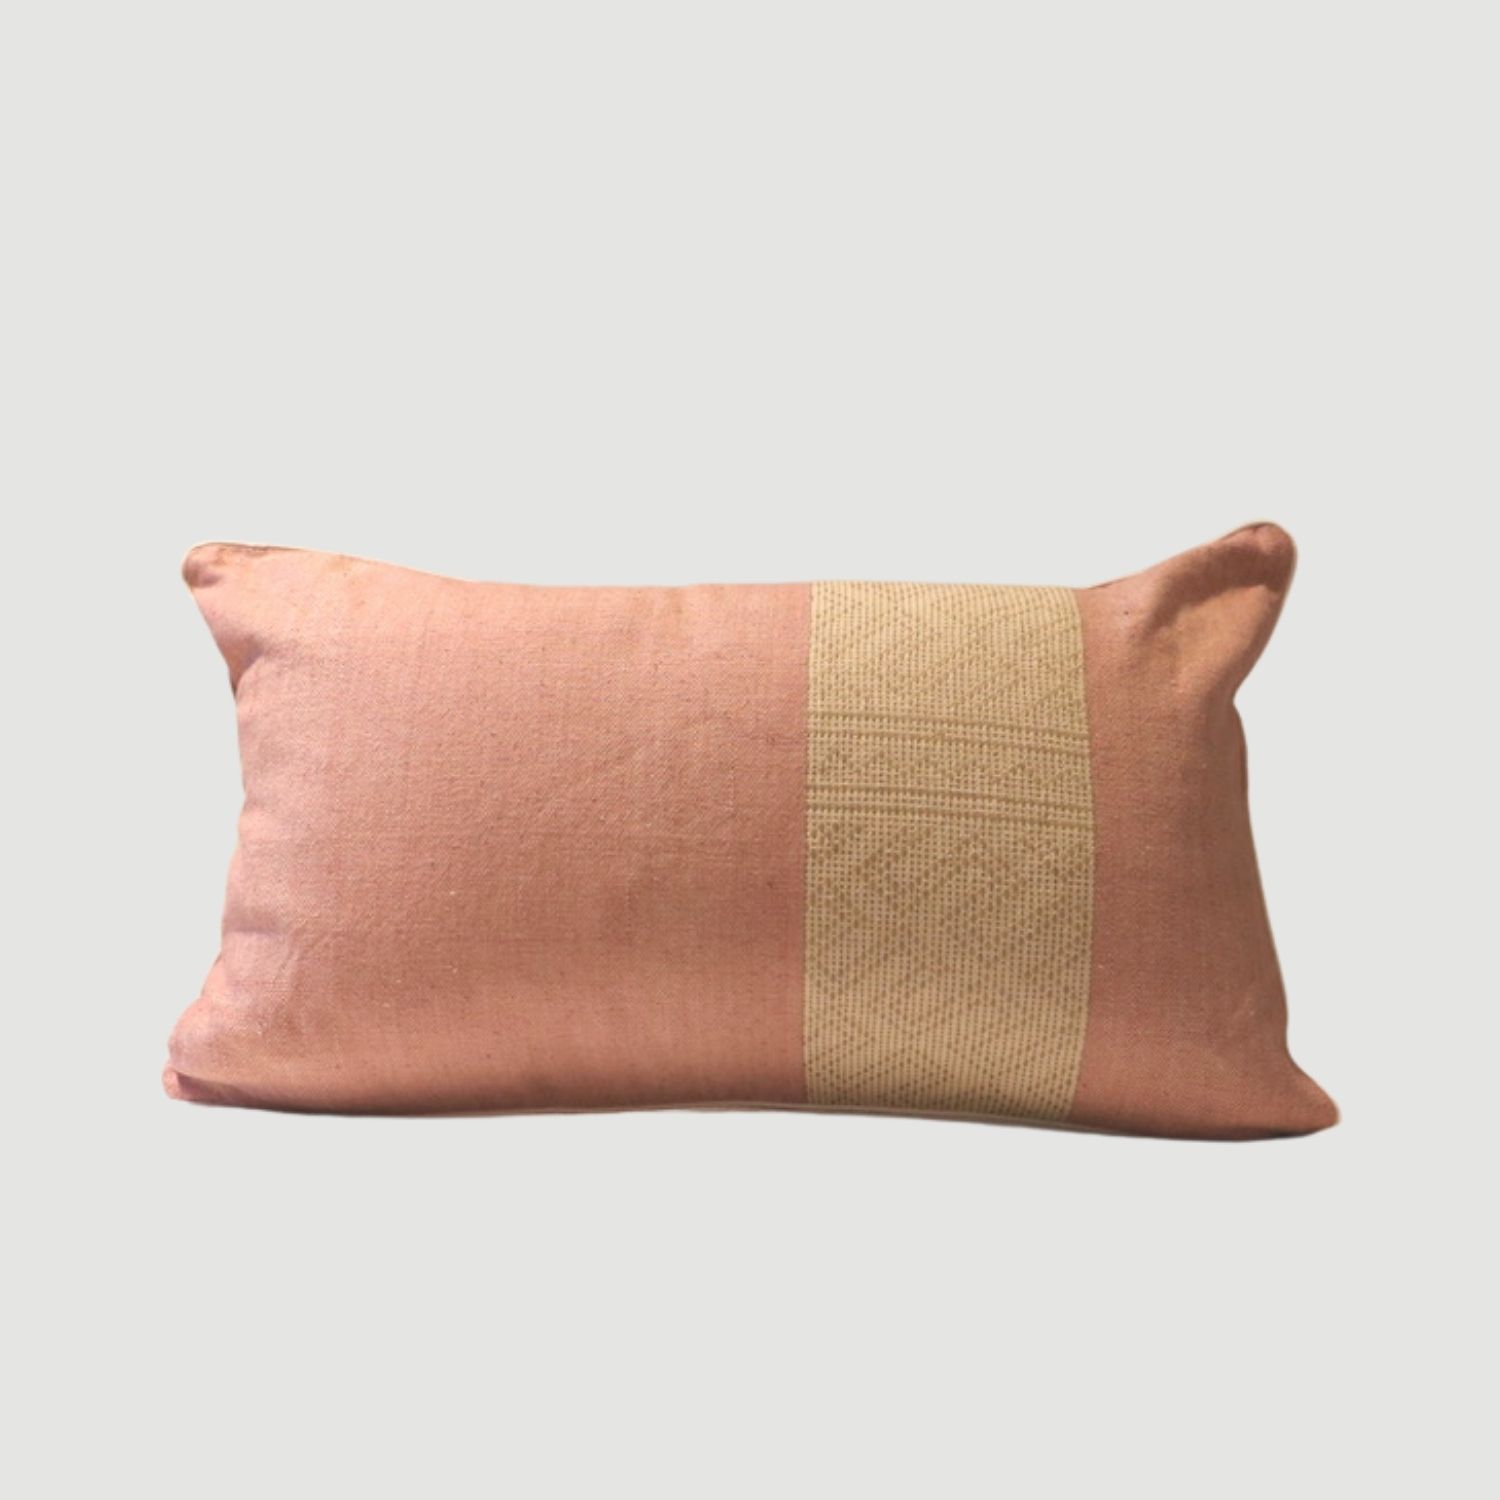 trendethics-coussin-cambodge-pse-coton-rose-rectangle-1